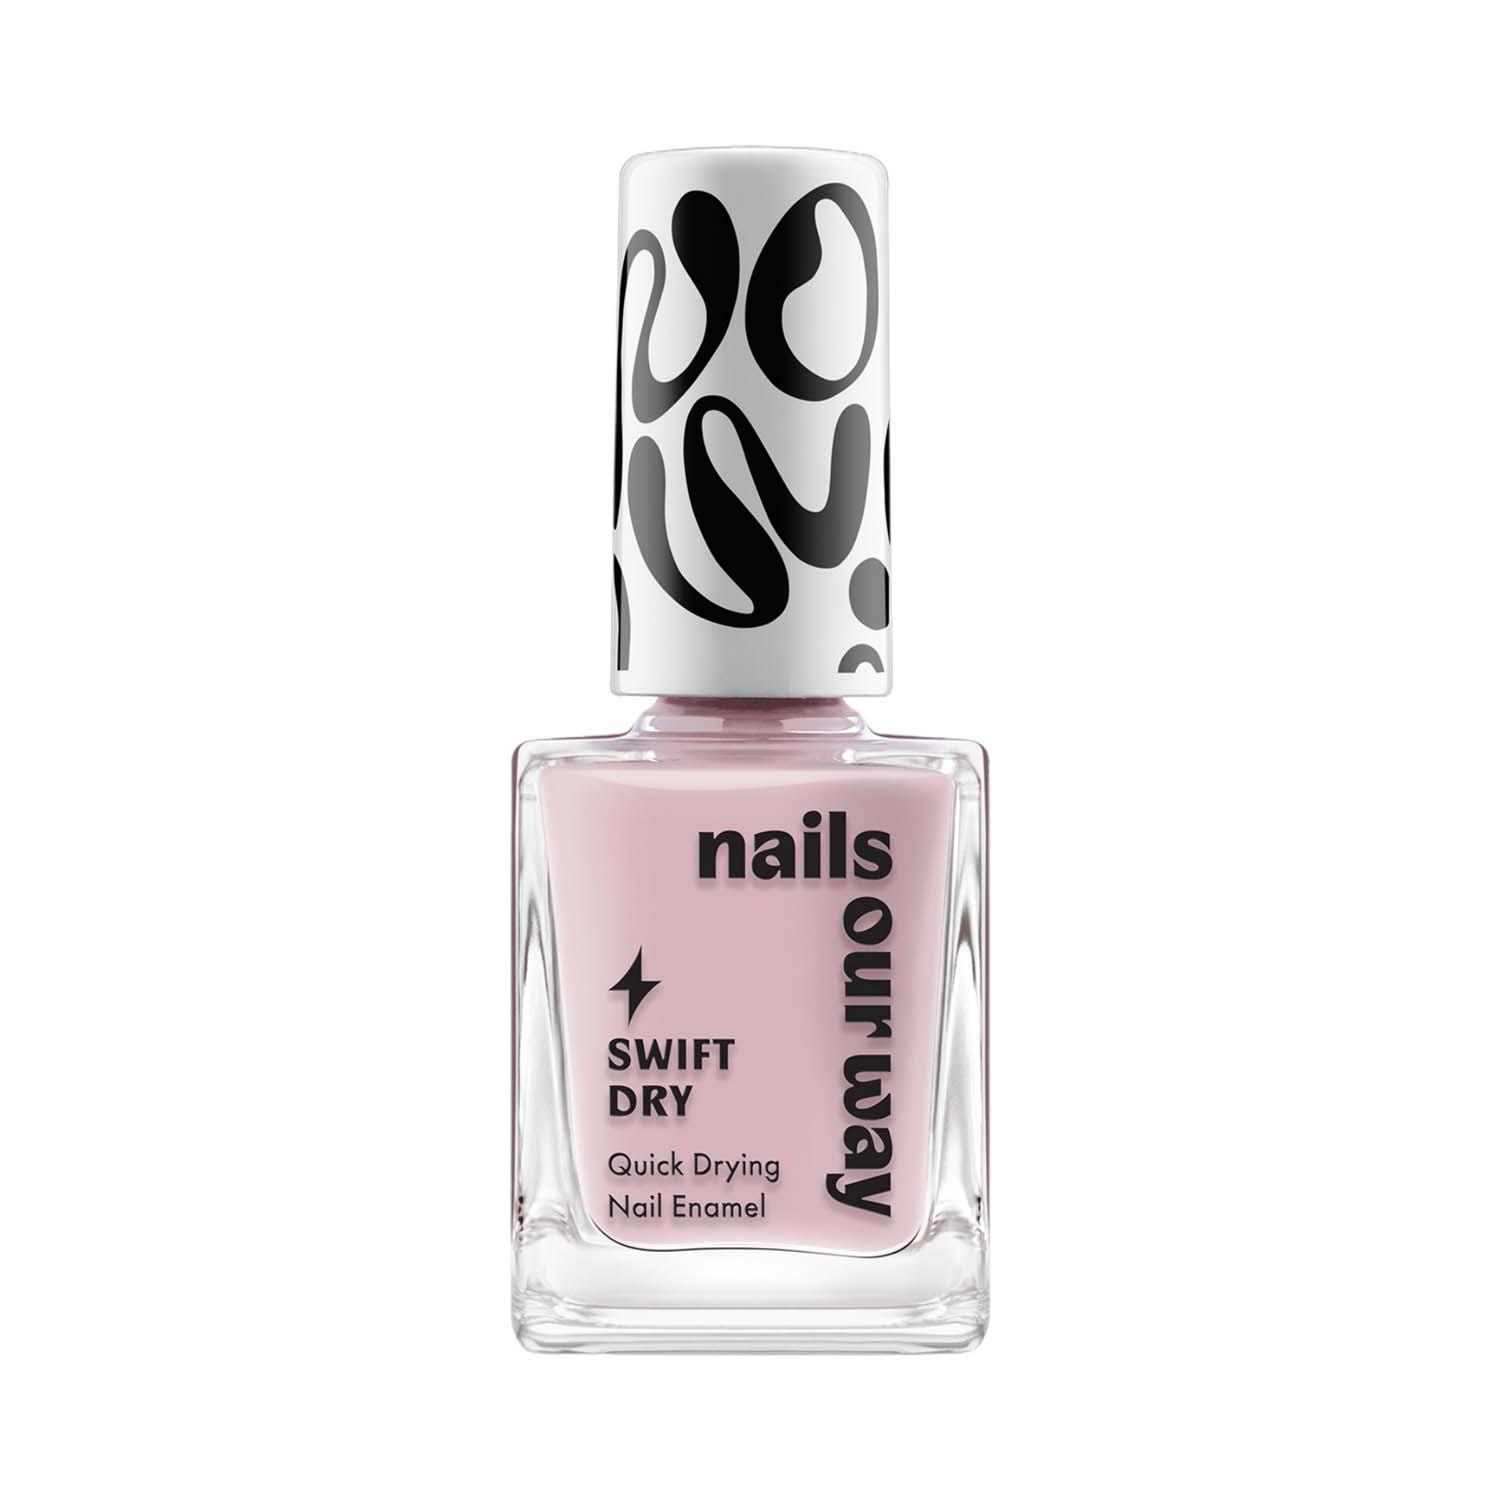 Nails Our Way Swift Dry Nail Enamel - Carnation Pink (10 ml)